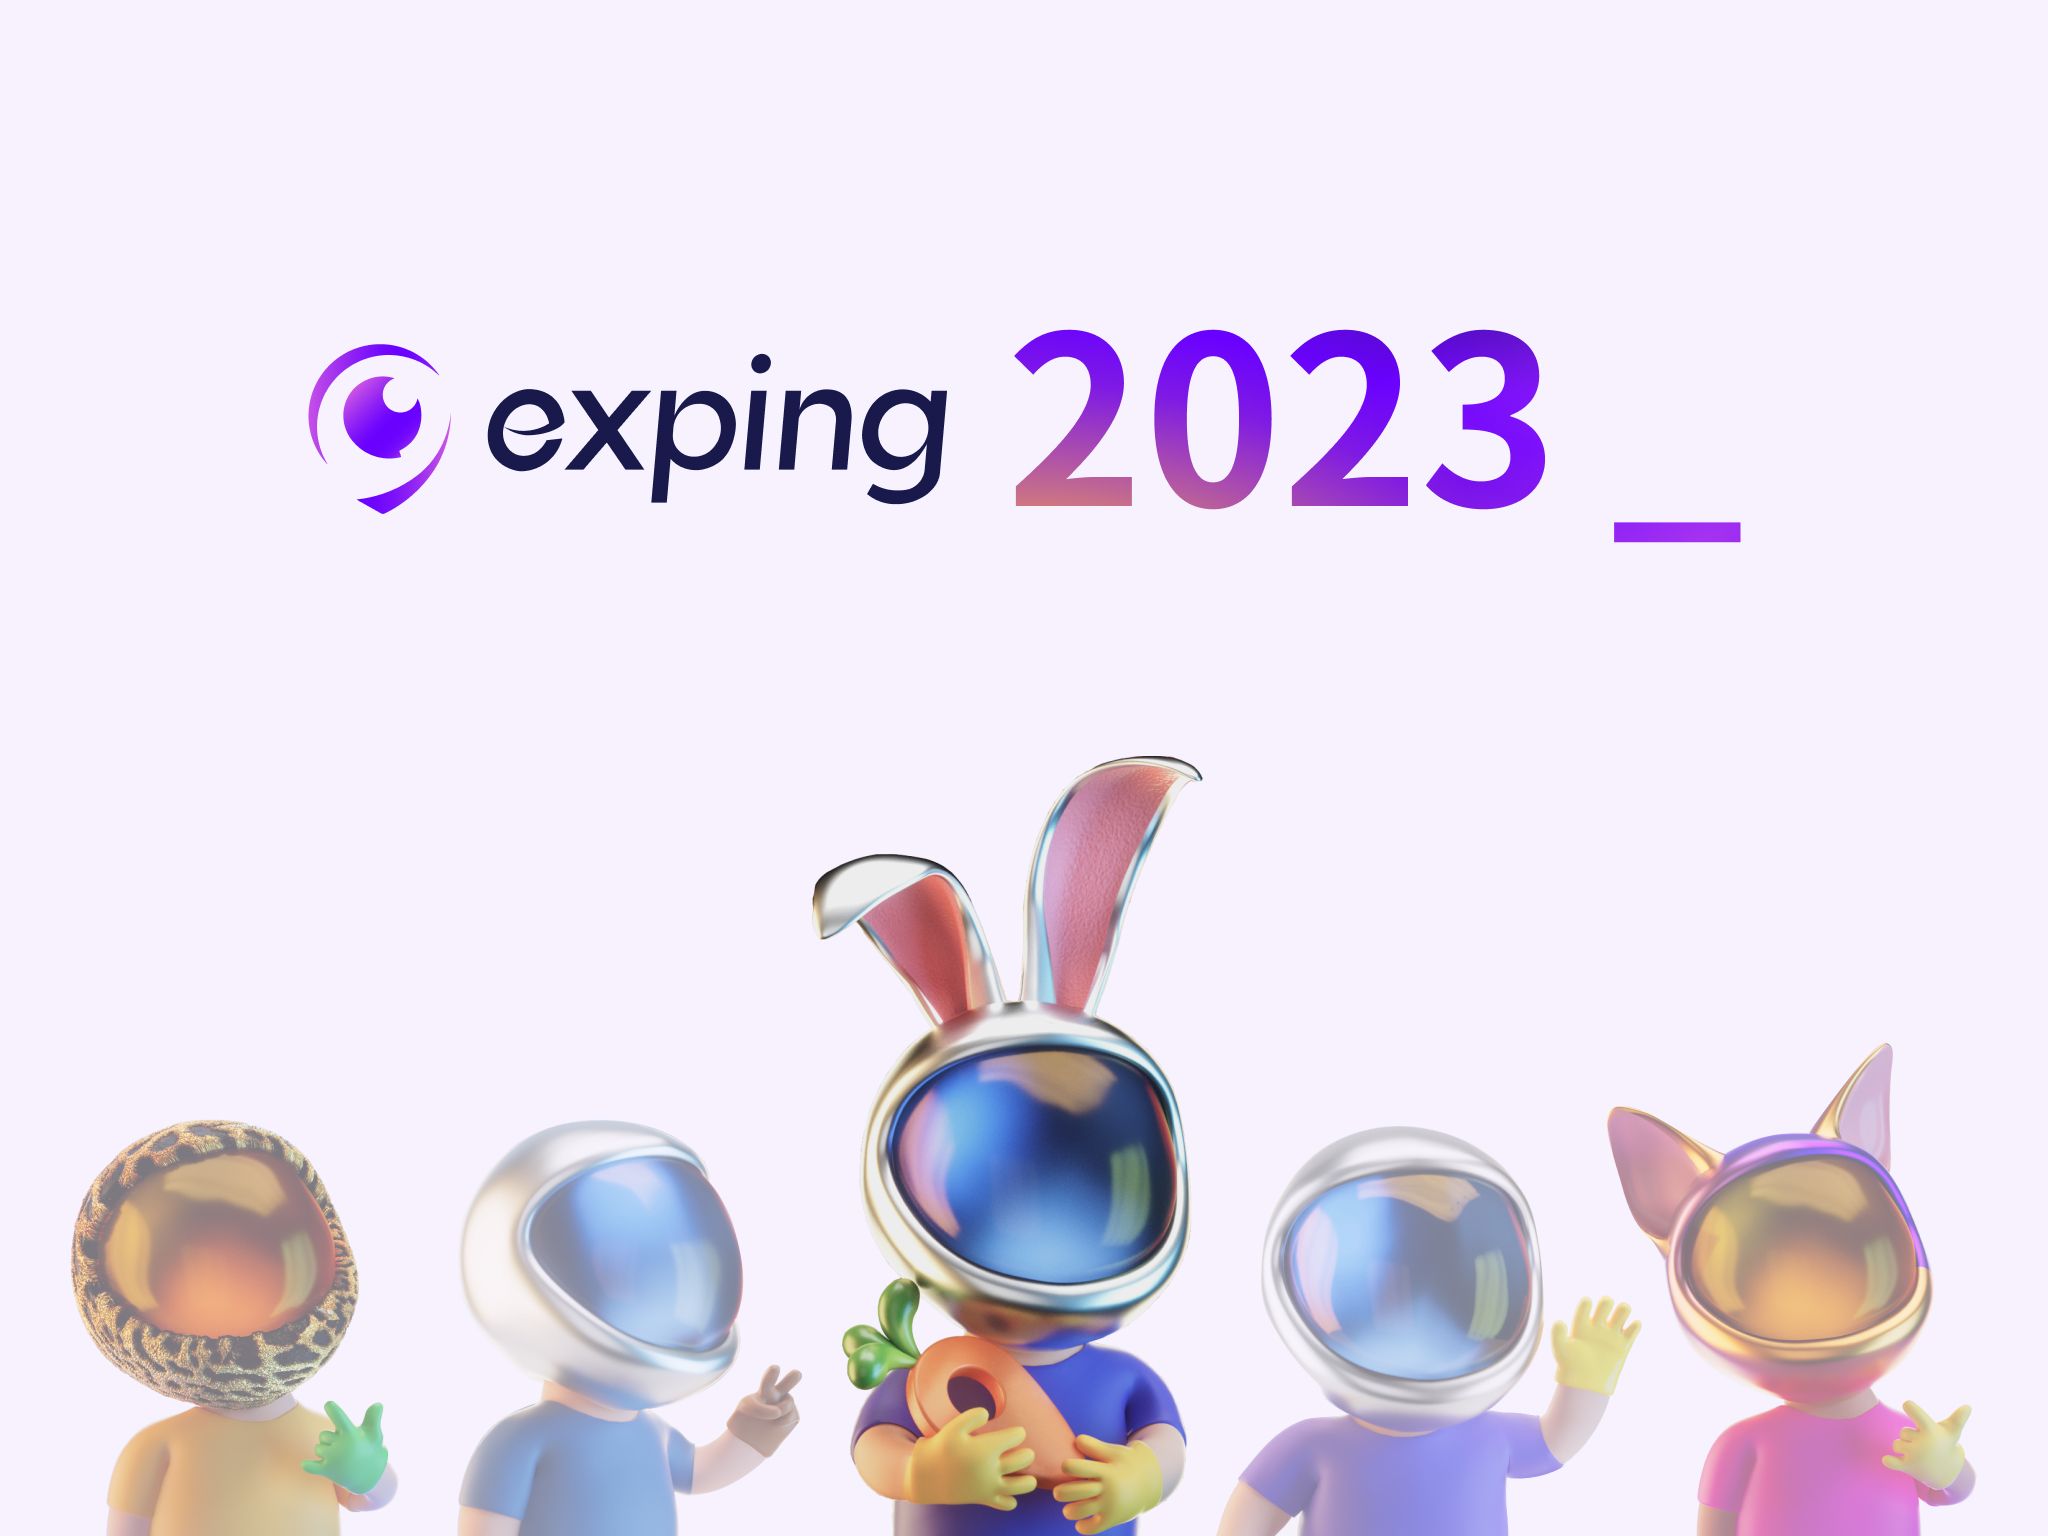 exping 2023｜The Journey Paves the Way for Milestones